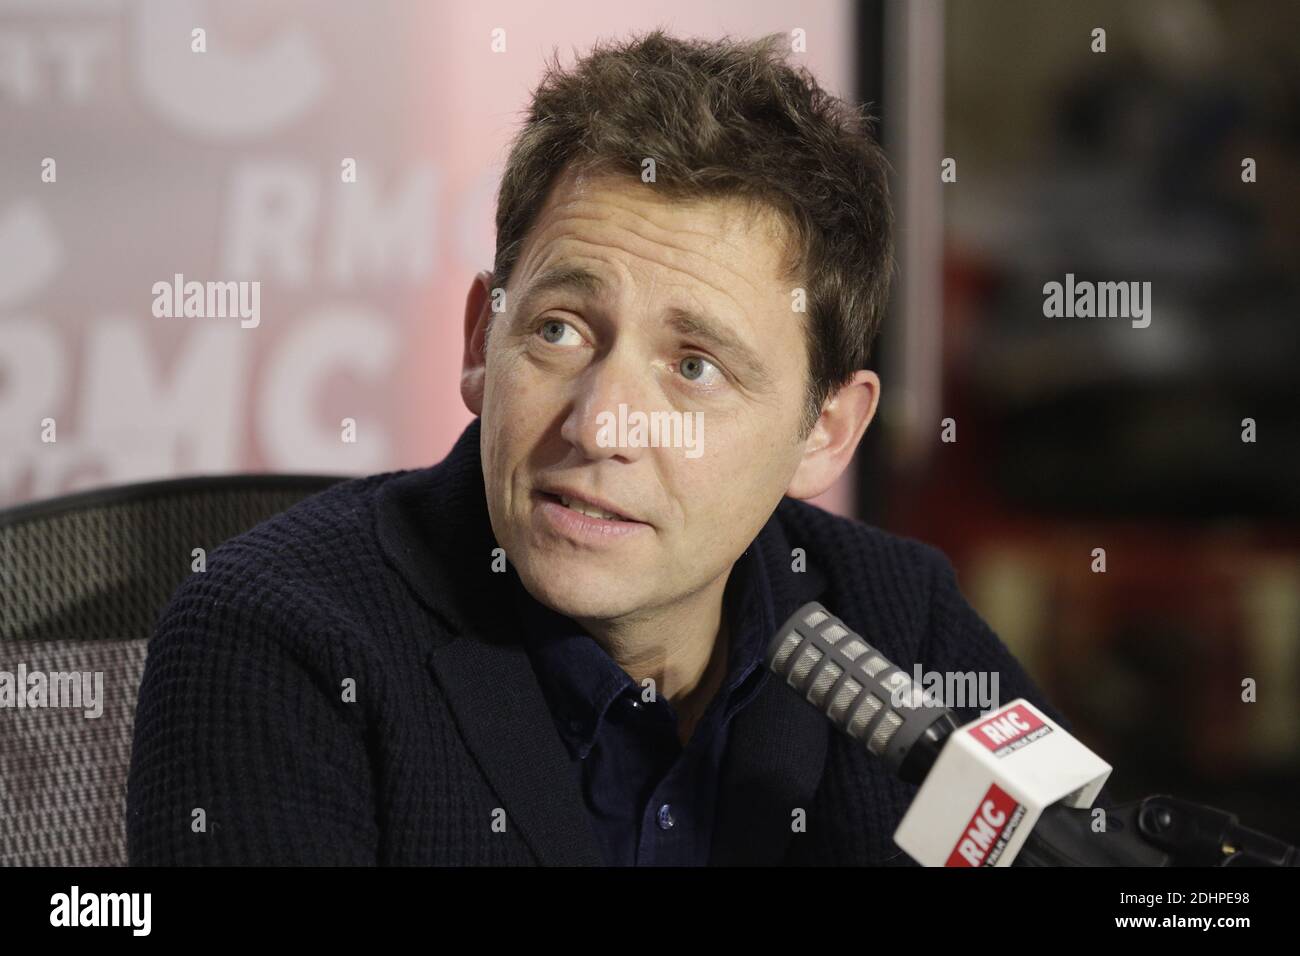 Exclusive - Daniel Riolo at the 'L'After Foot' talk show on RMC Radio, in  Paris, France, on February 24, 2016. Photo by Jerome Domine/ABACAPRESS.COM  Stock Photo - Alamy